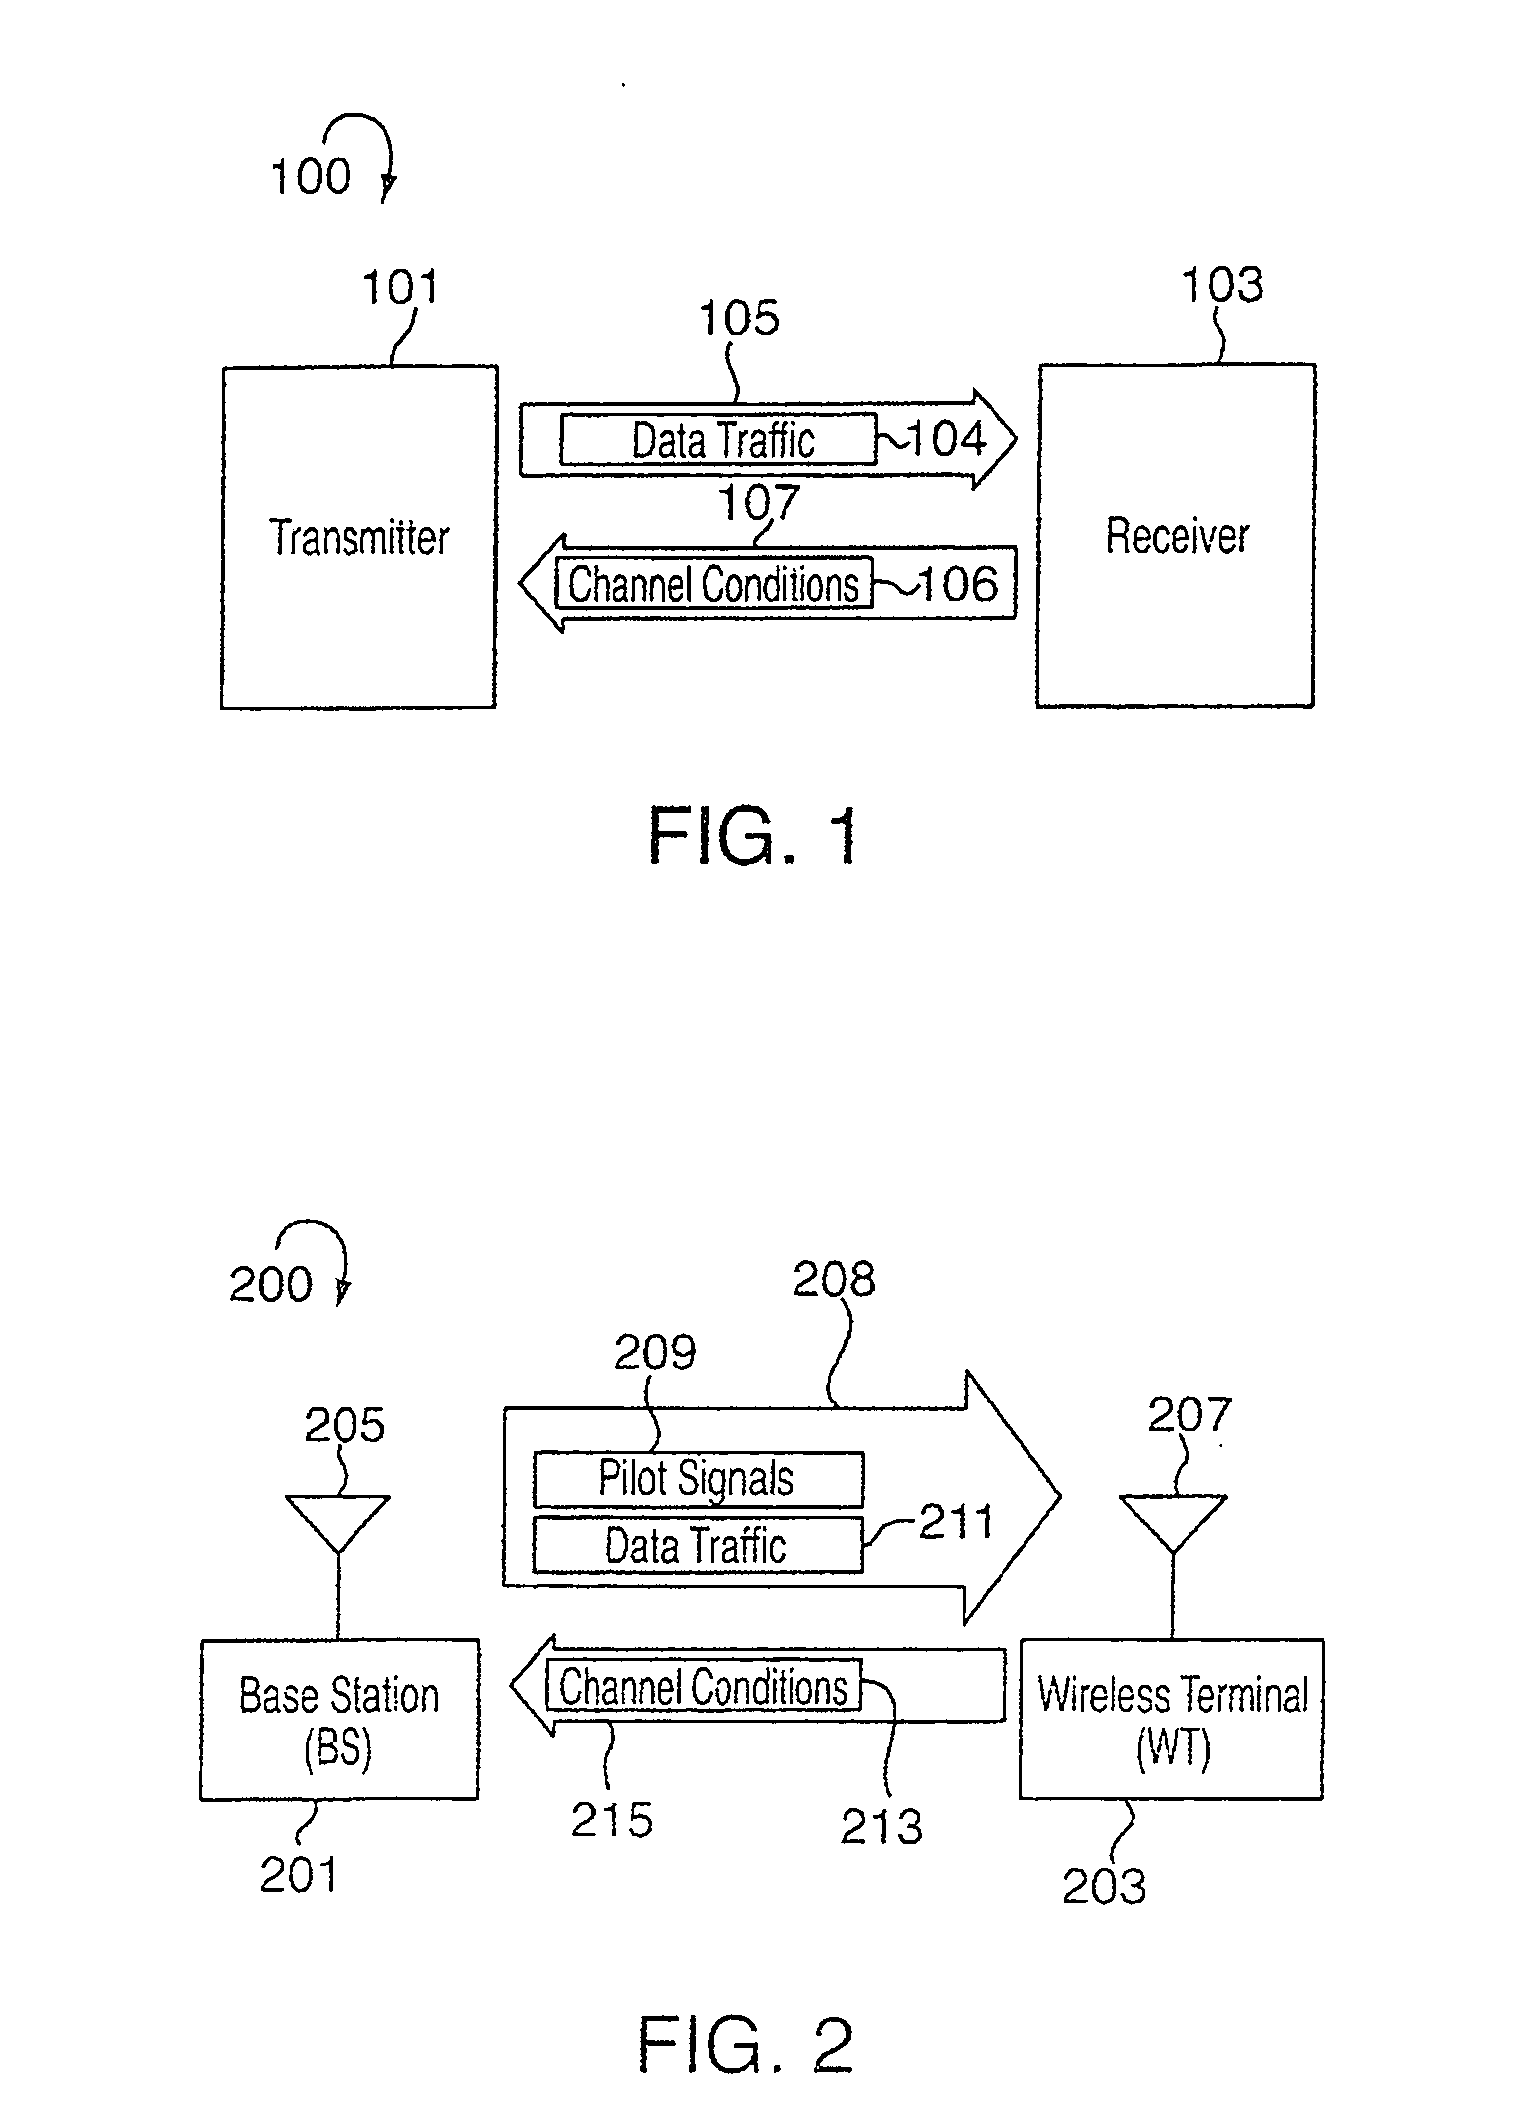 Methods and apparatus for characterizing noise in a wireless communications system